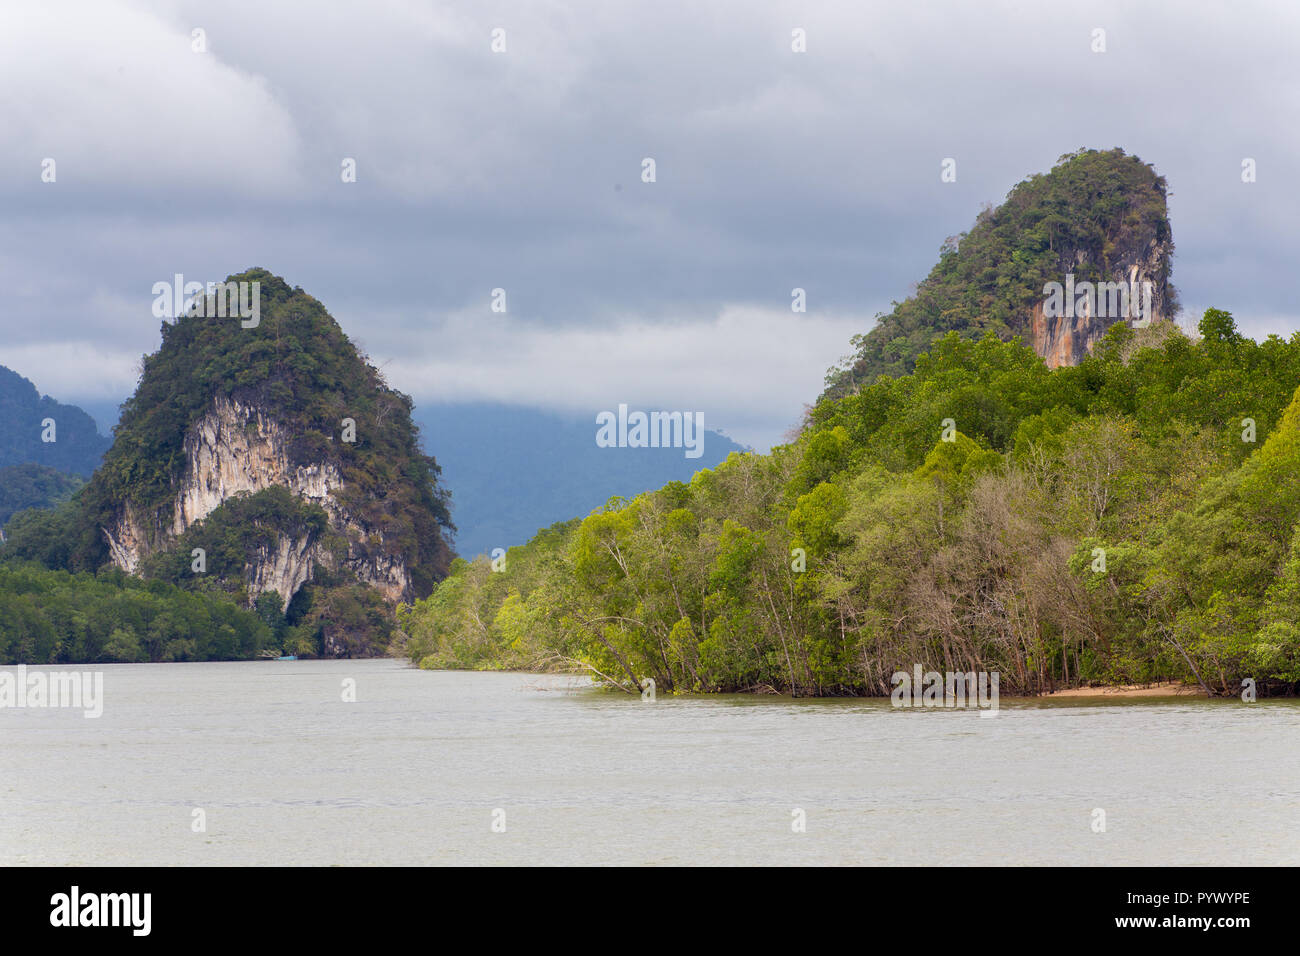 Krabi town river landscape in south Thailand Stock Photo